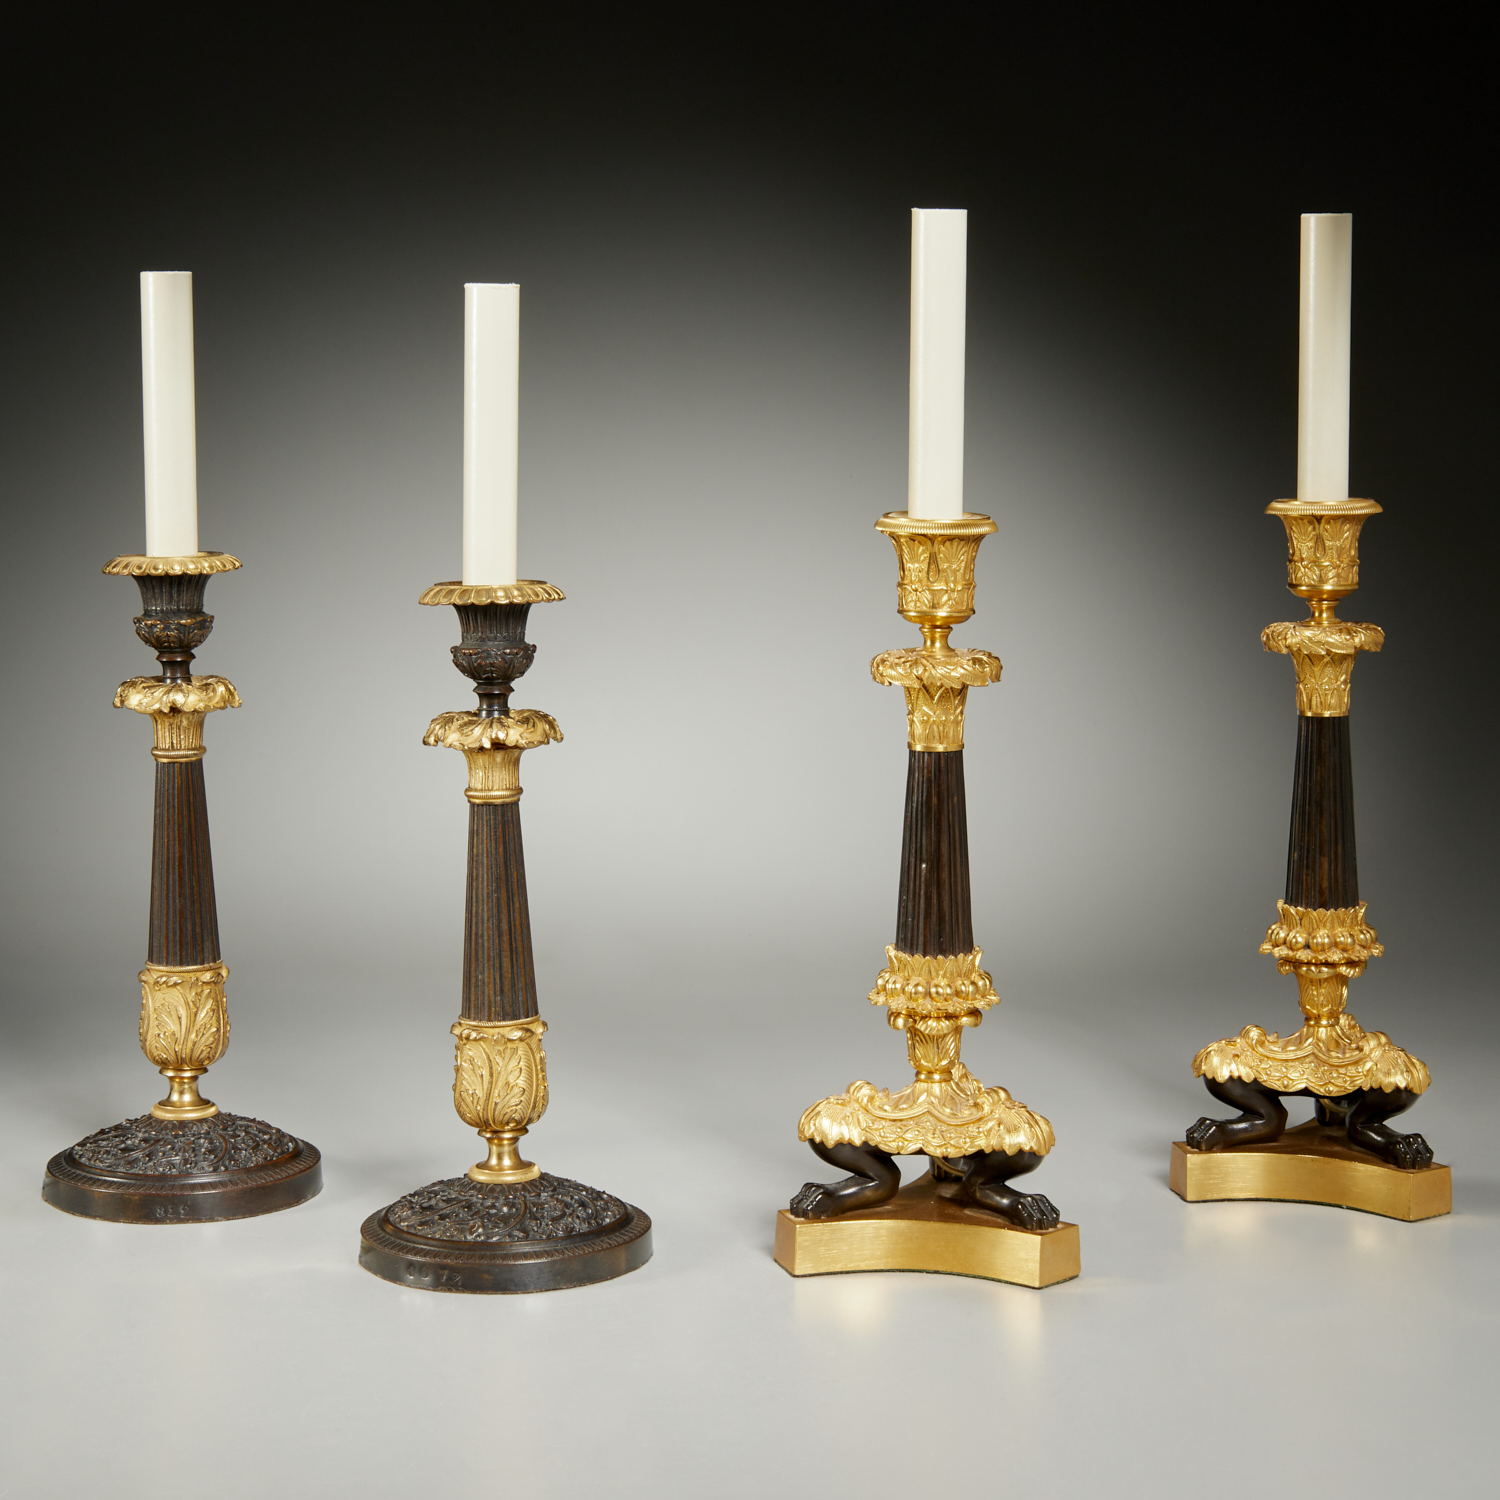  2 PAIRS EMPIRE STYLE BRONZE CANDLESTICK 3c25d4